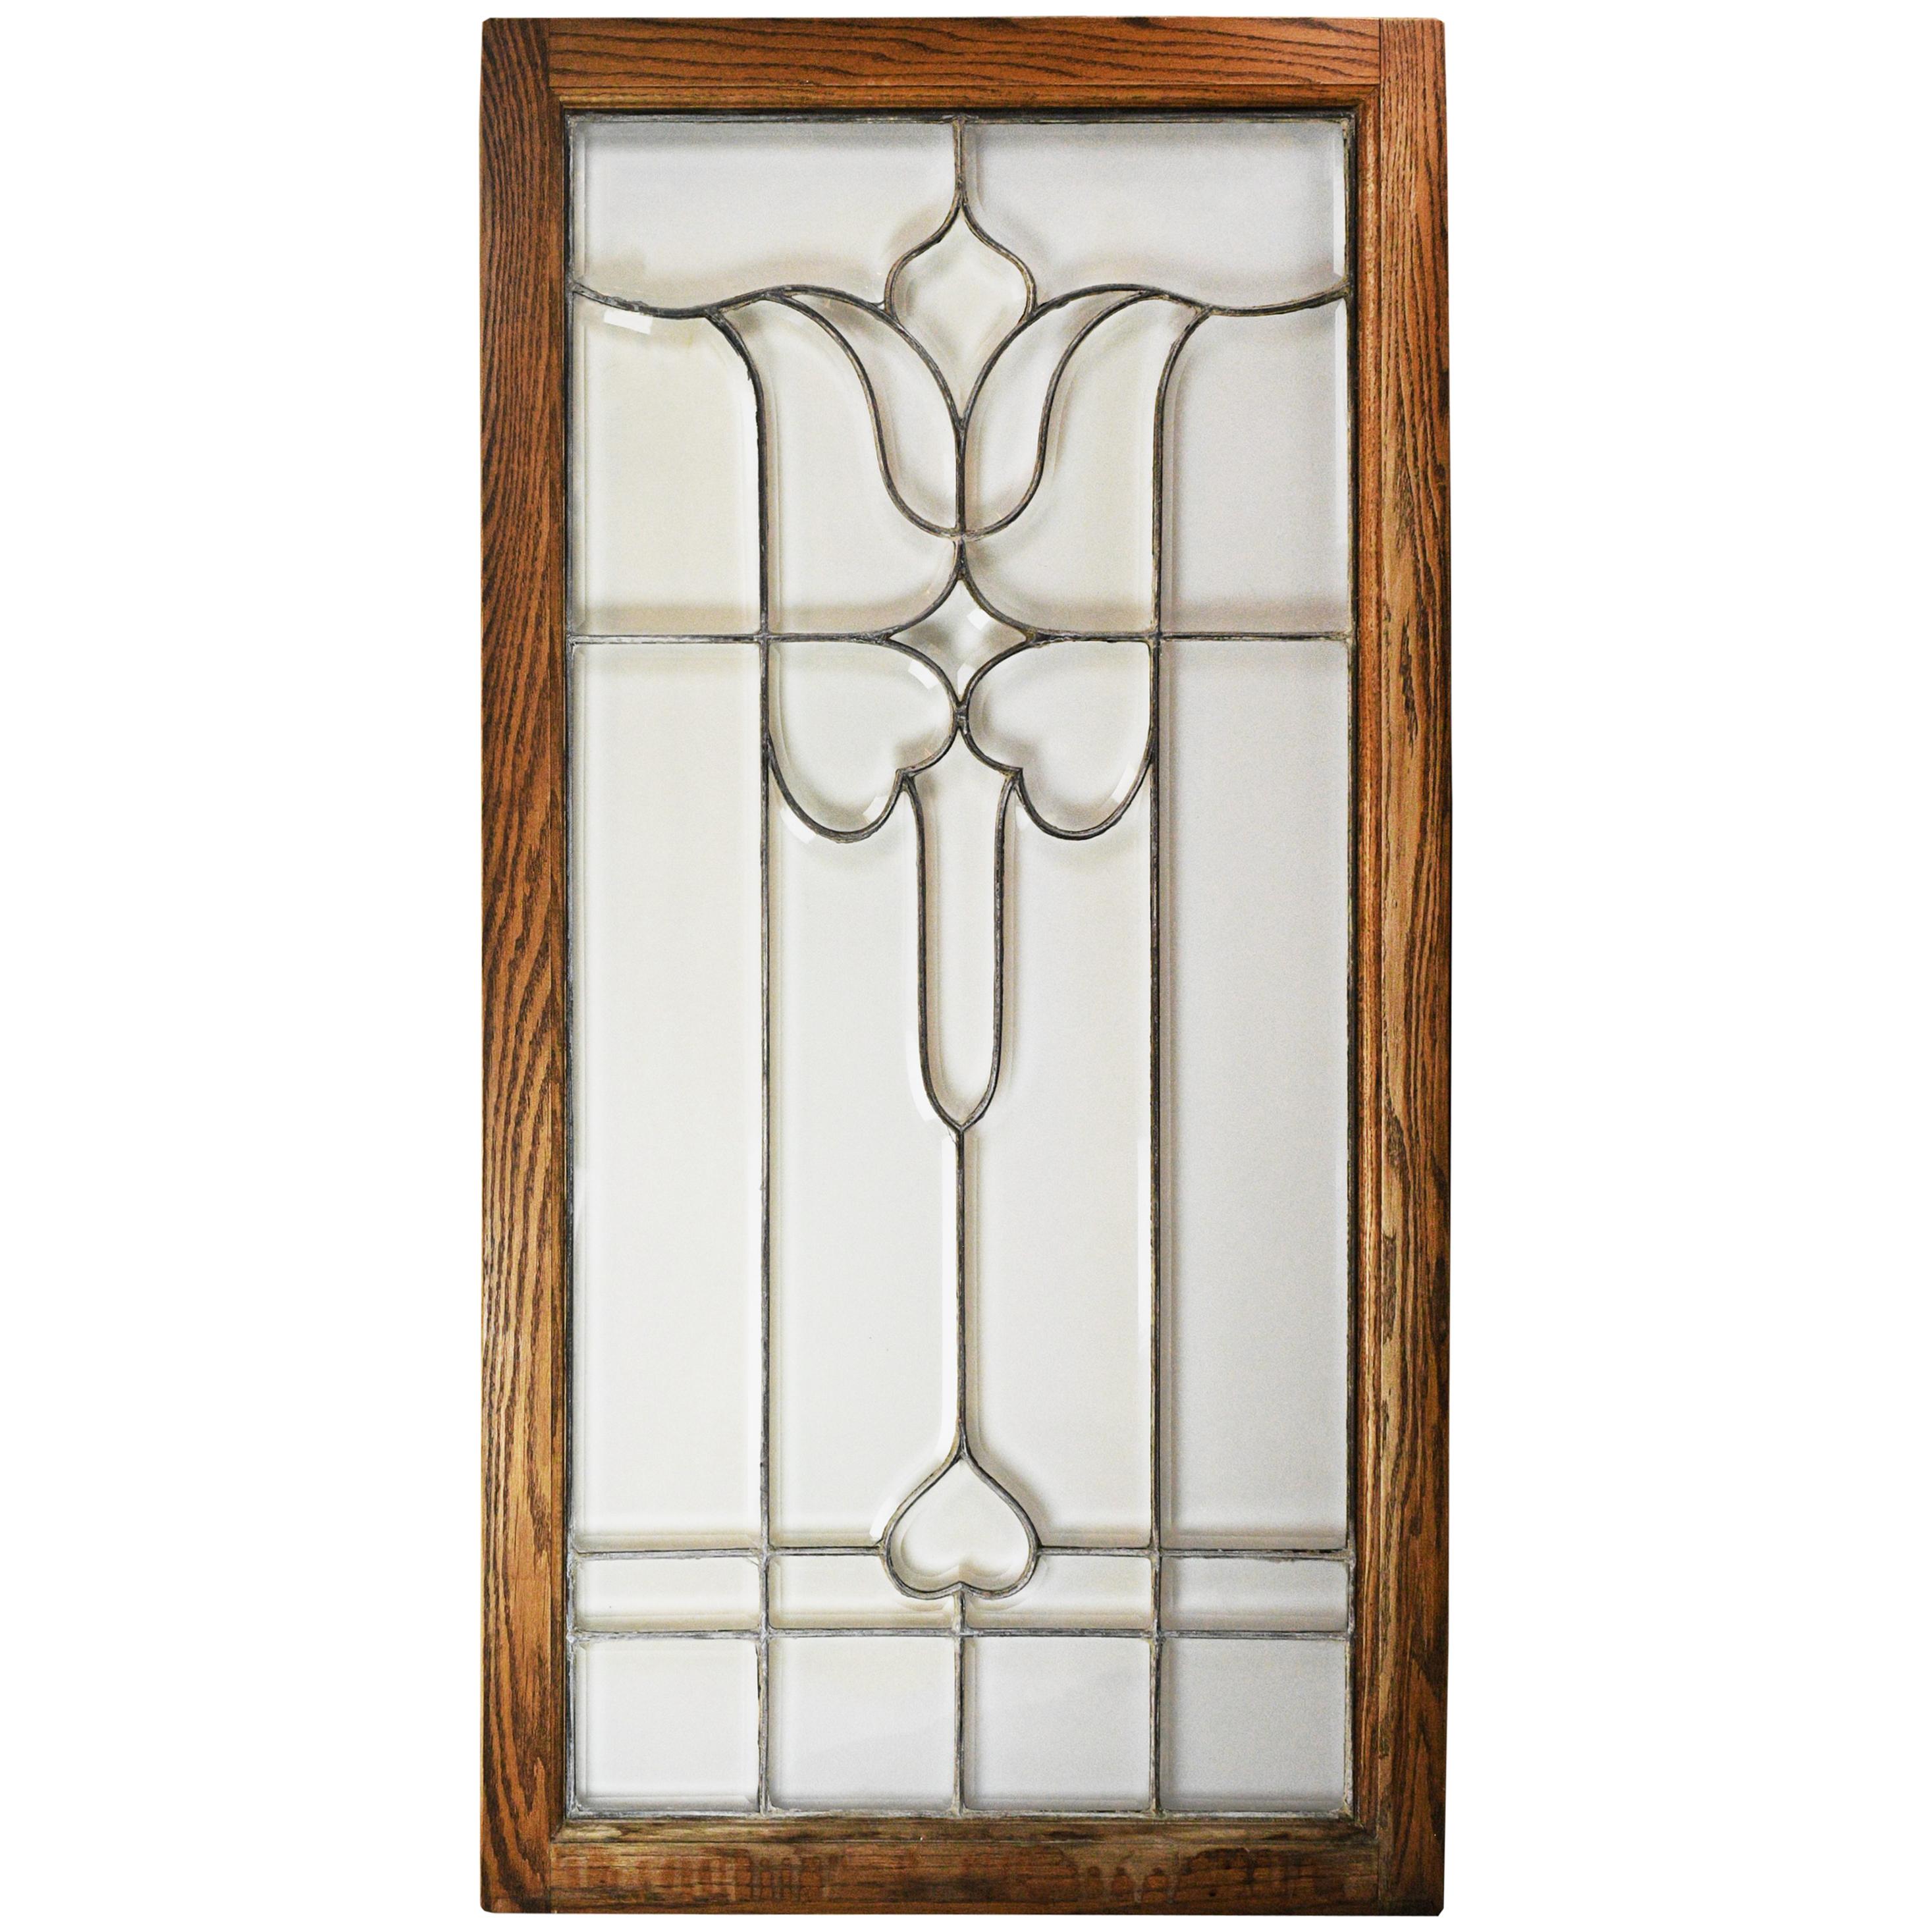 Large Beveled Glass Window For Sale